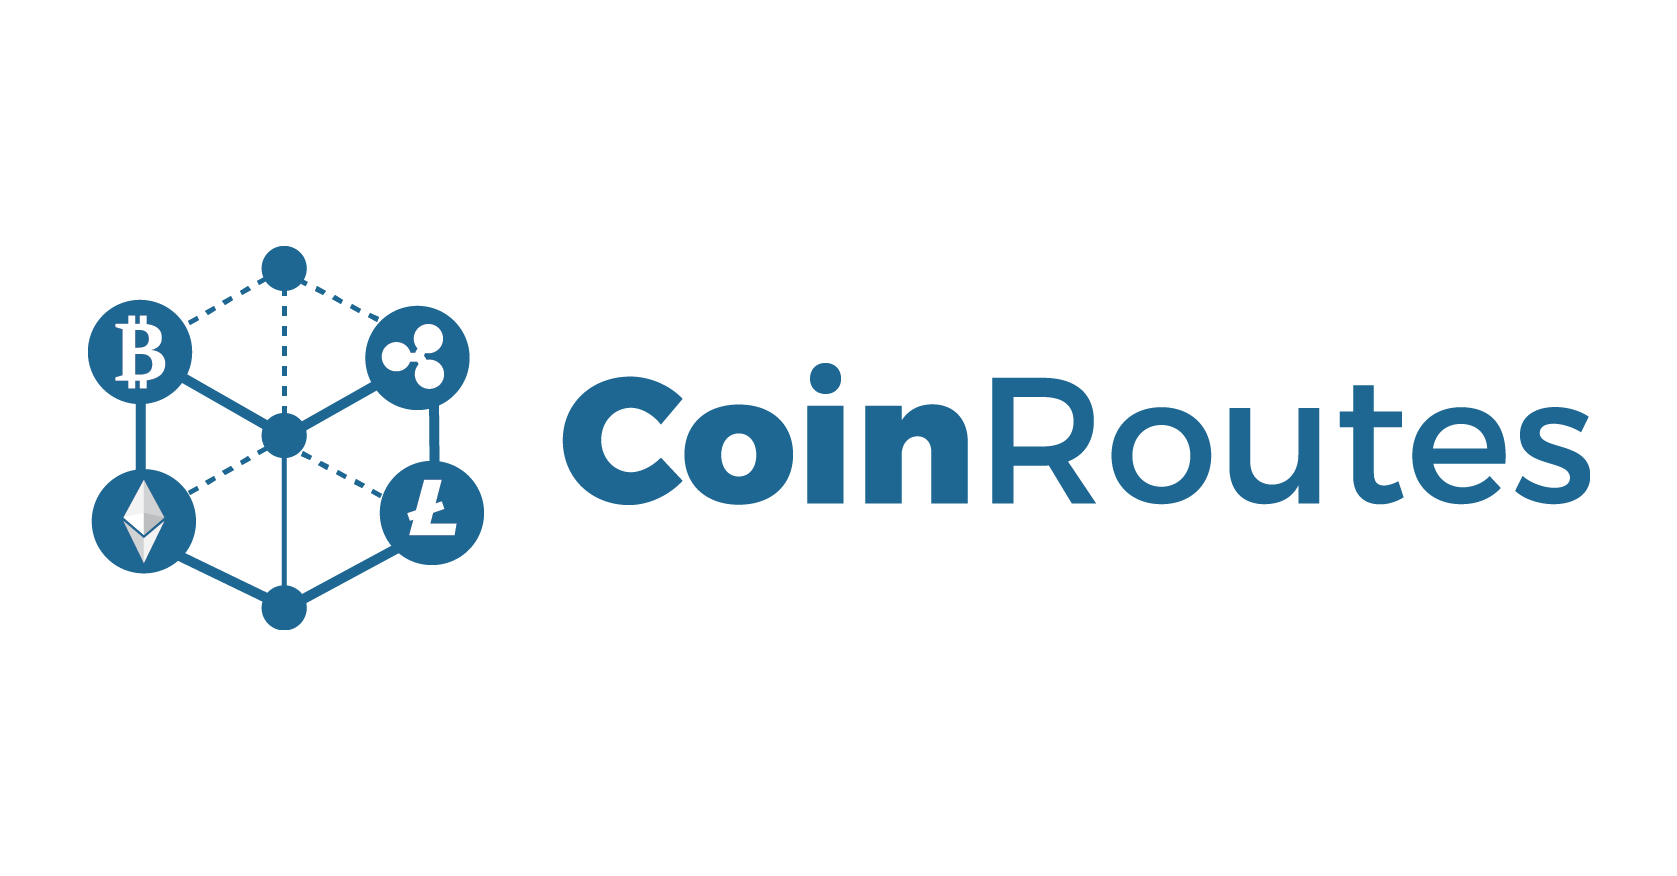 About CoinRoutes